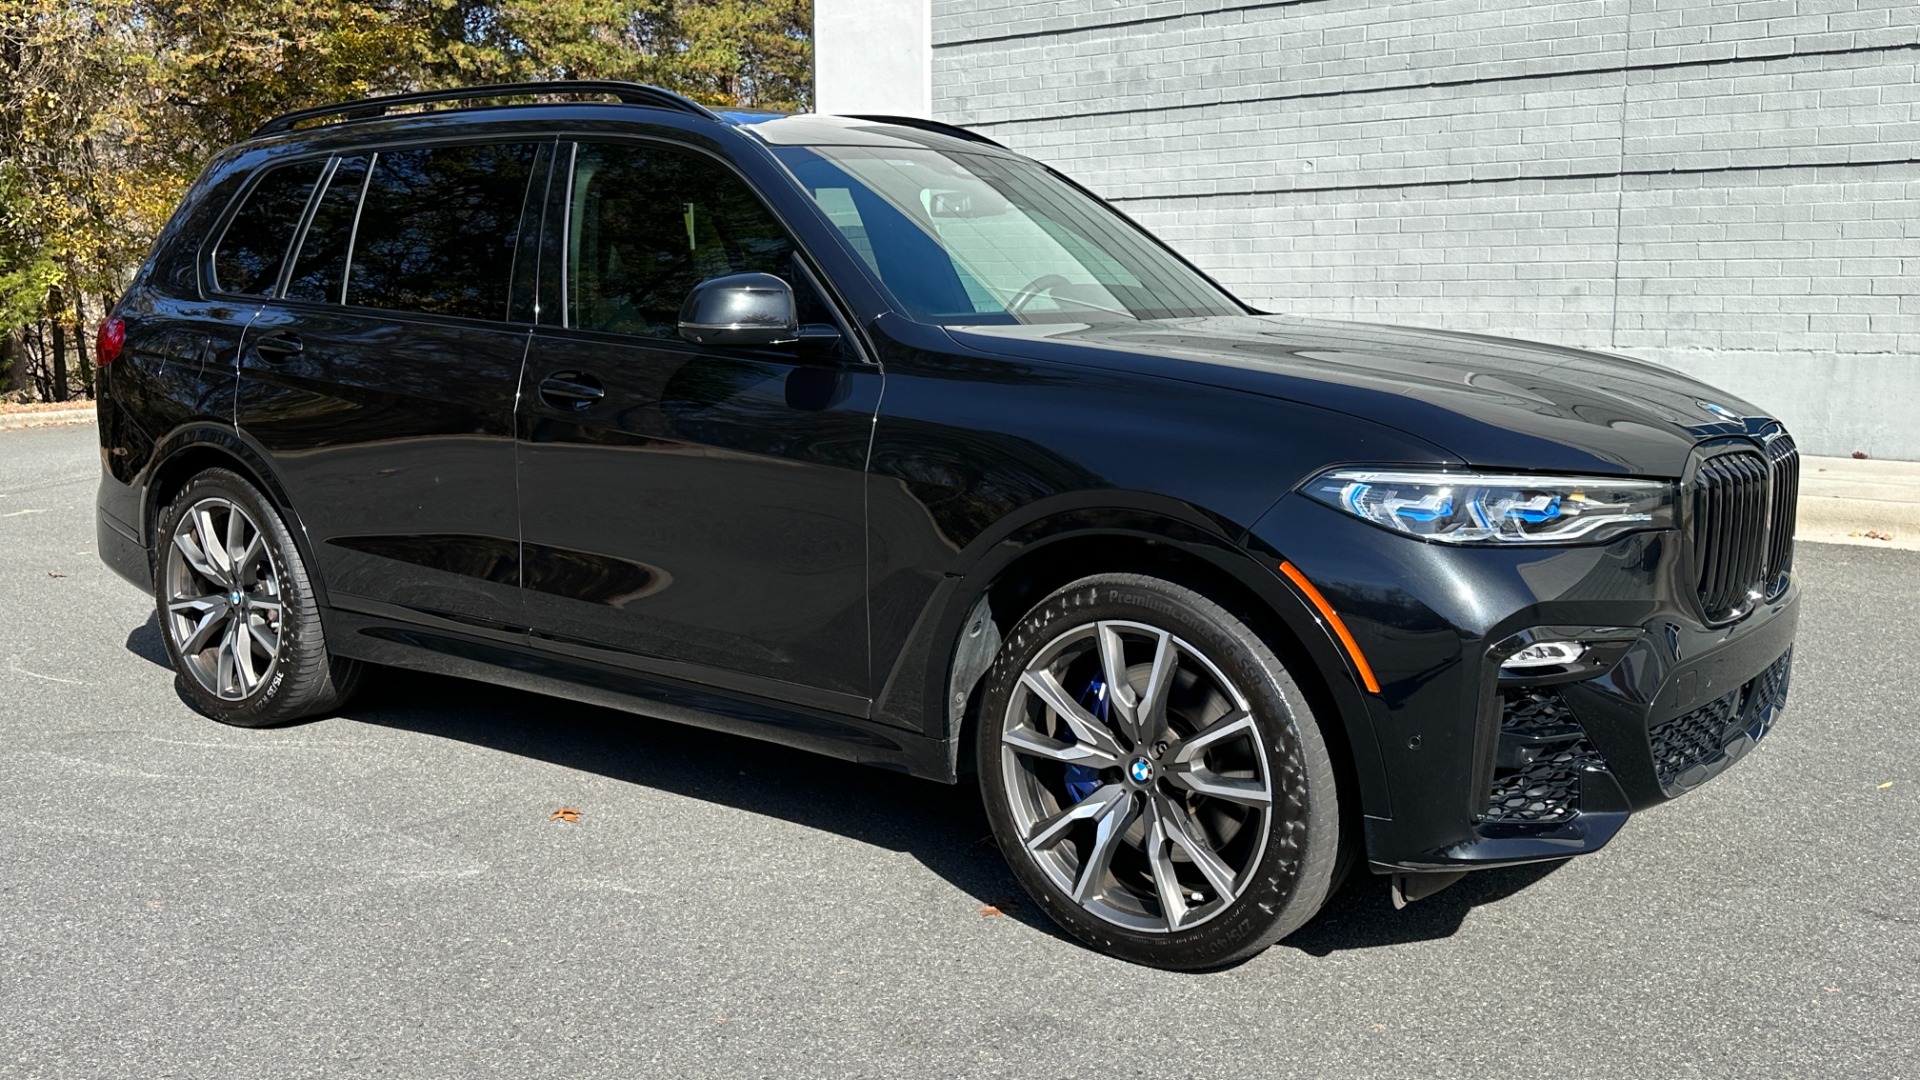 Used 2020 BMW X7 M50i / LOADED / DYNAMIC HANDLING PKG / EXECUTIVE / LUXURY SEATING PKG / MOR for sale $57,995 at Formula Imports in Charlotte NC 28227 2